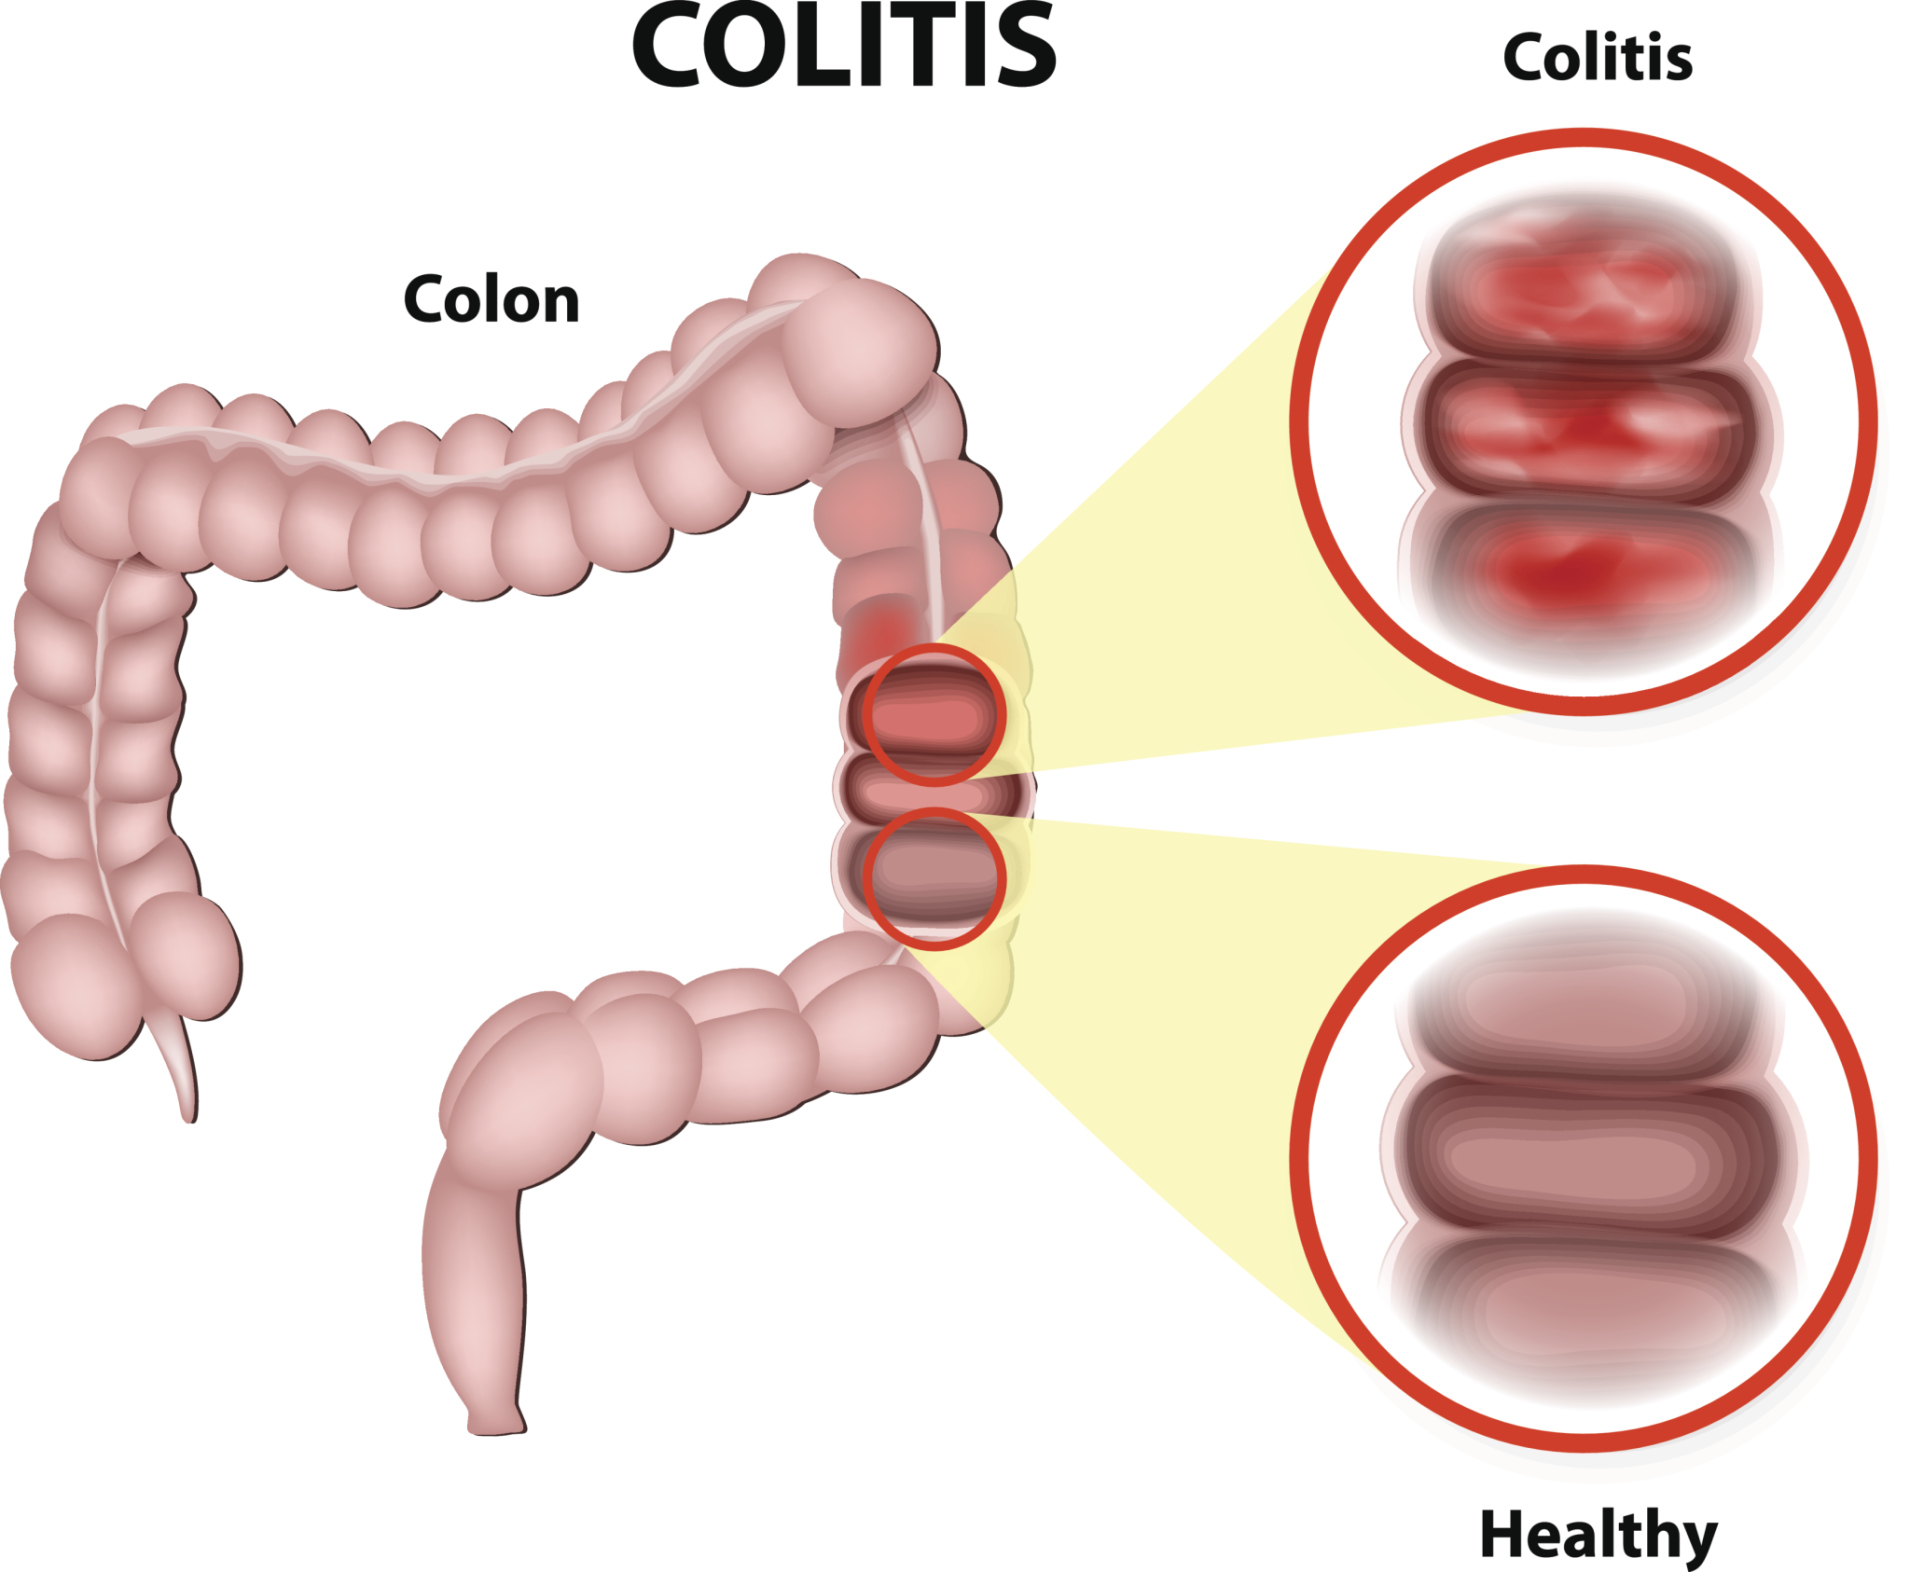 What are some common symptoms of colon inflammation?